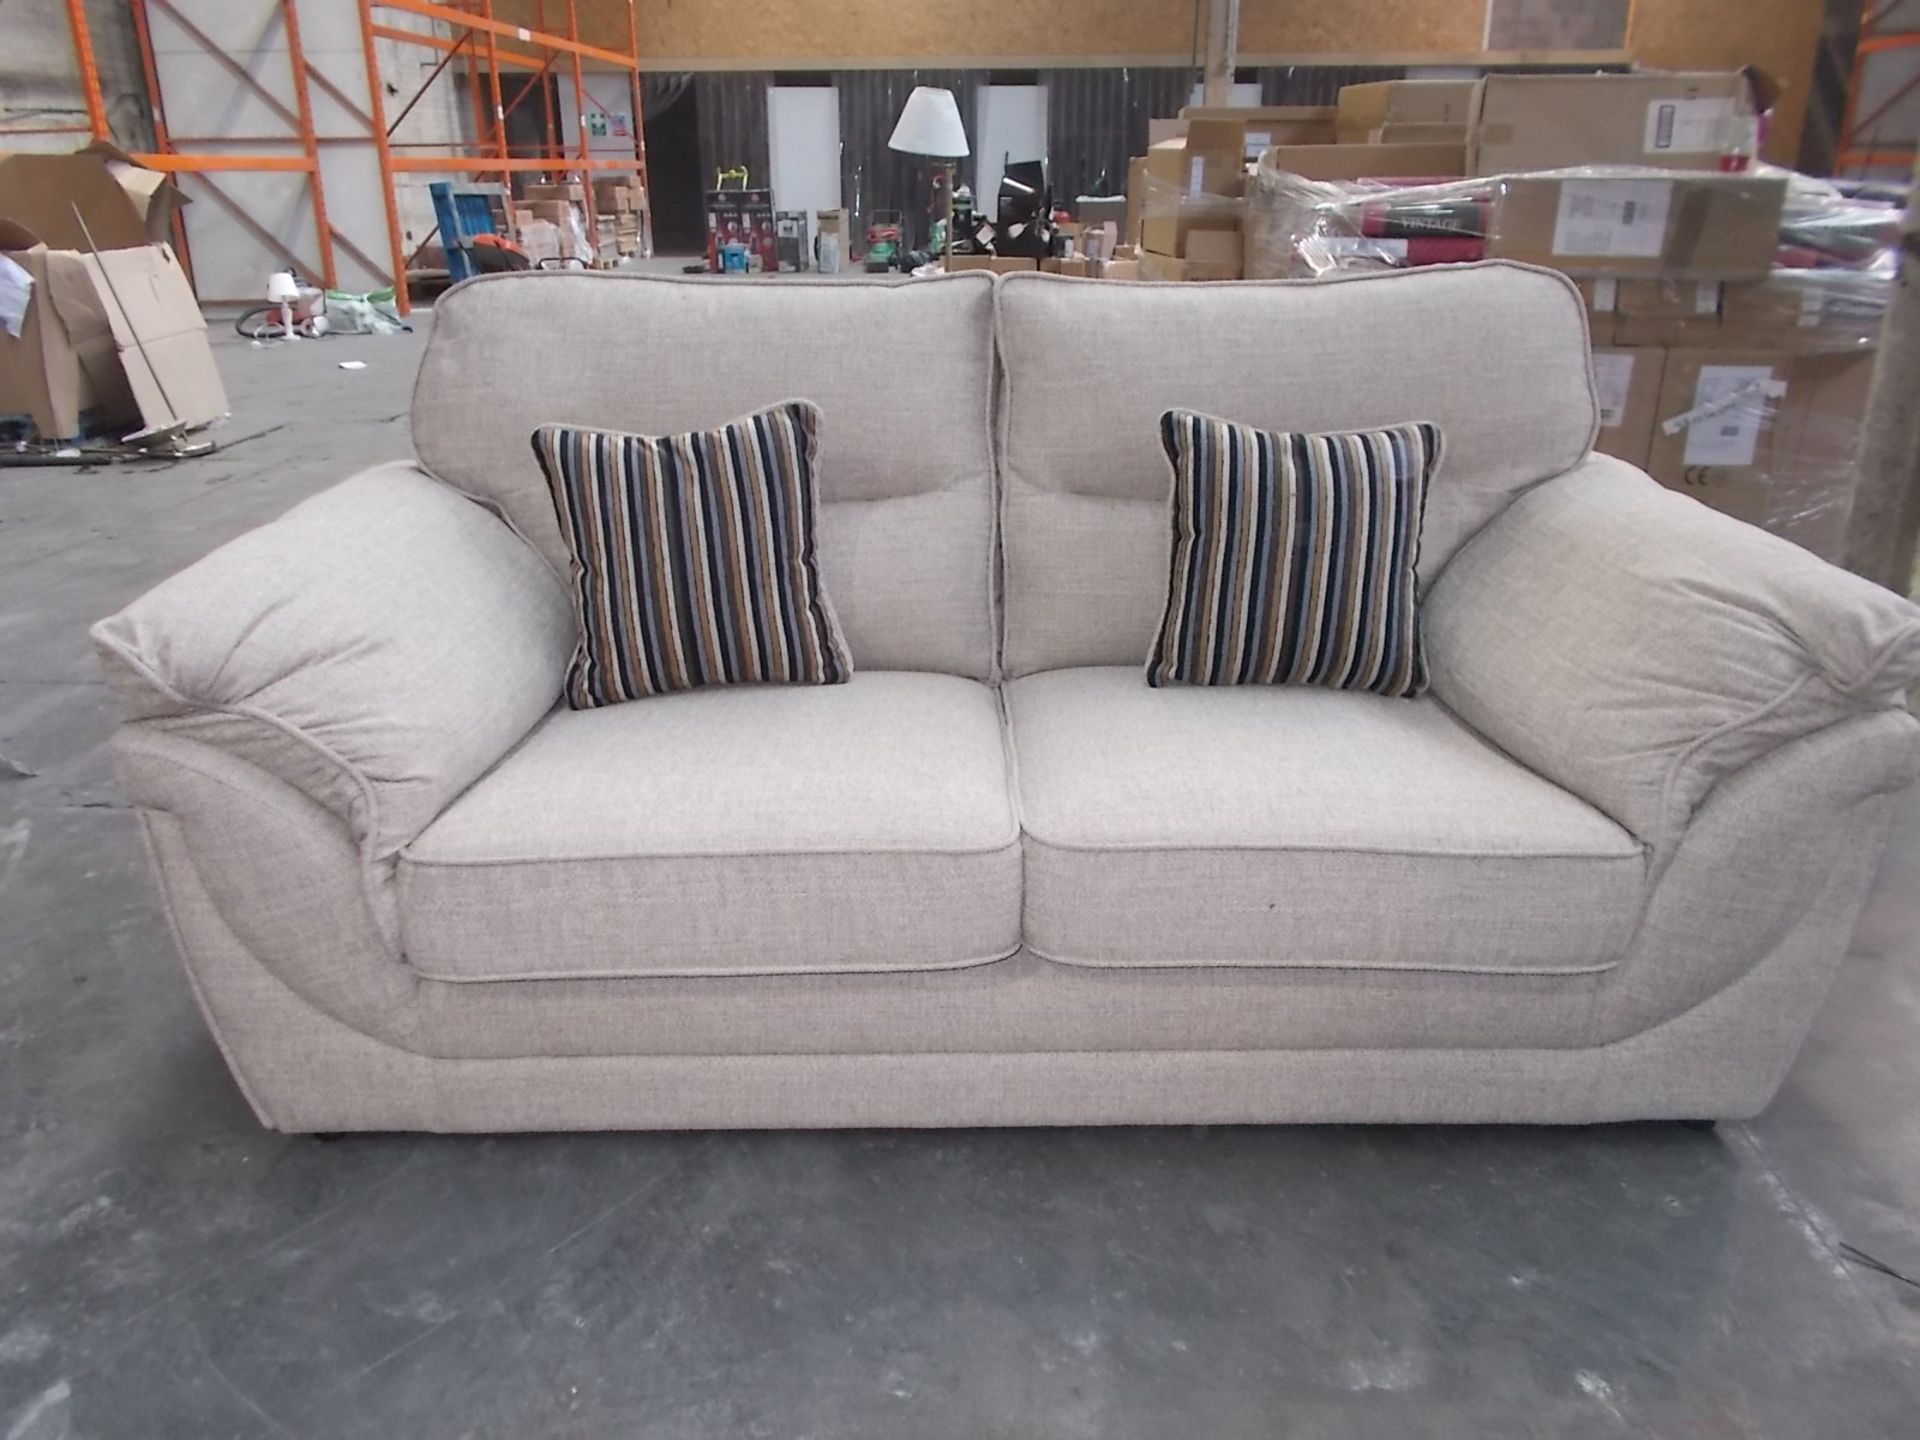 1 CANTERBURY STYLE SAND FABRIC GRANDE 3 SEATER SOFA (EXCELLENT CONDITION, AS NEW)